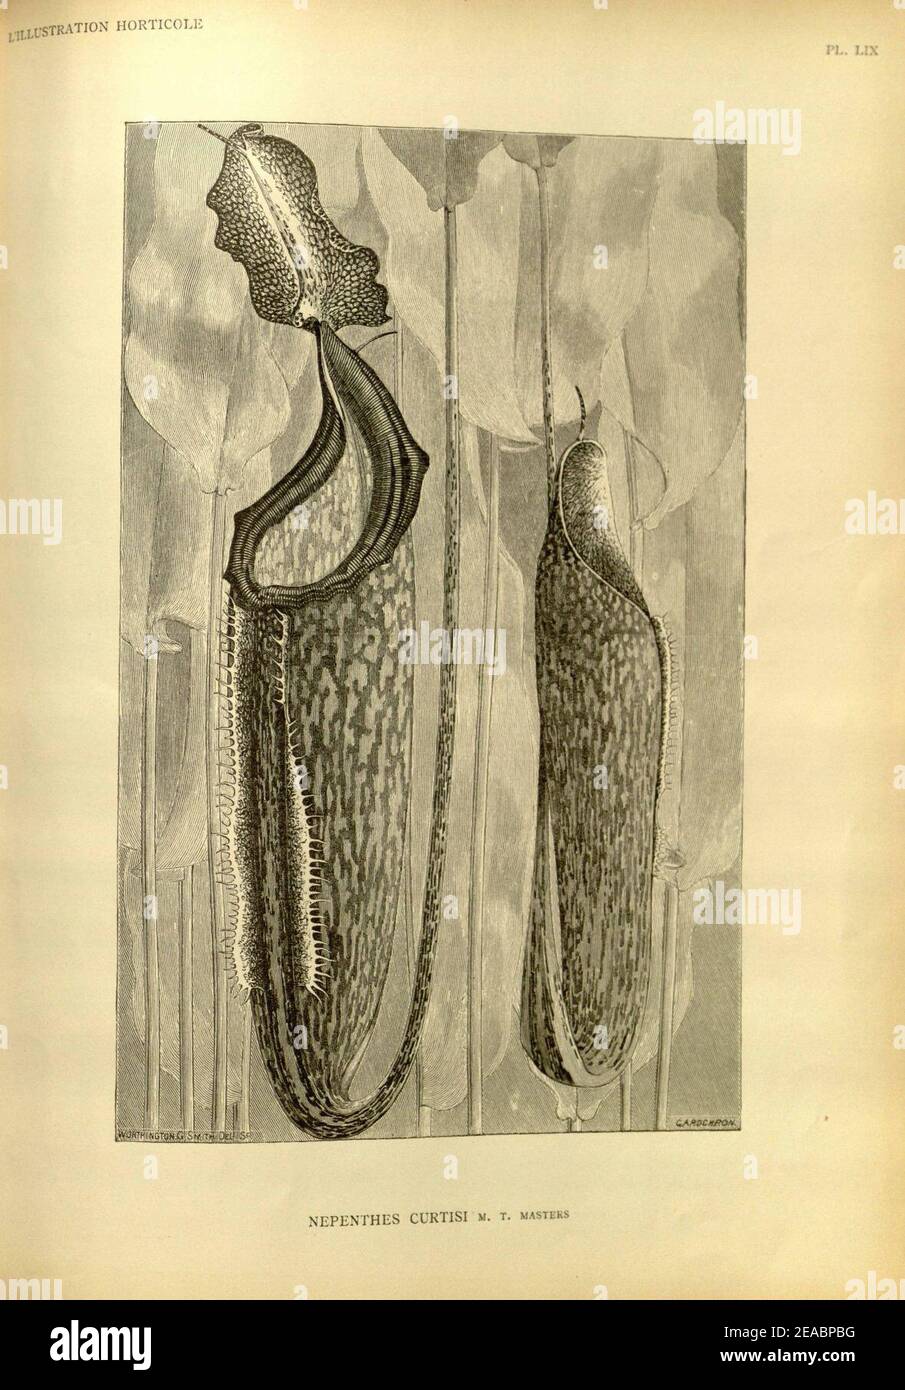 Nepenthes curtisii - l’Illustration horticole (1888). Foto Stock